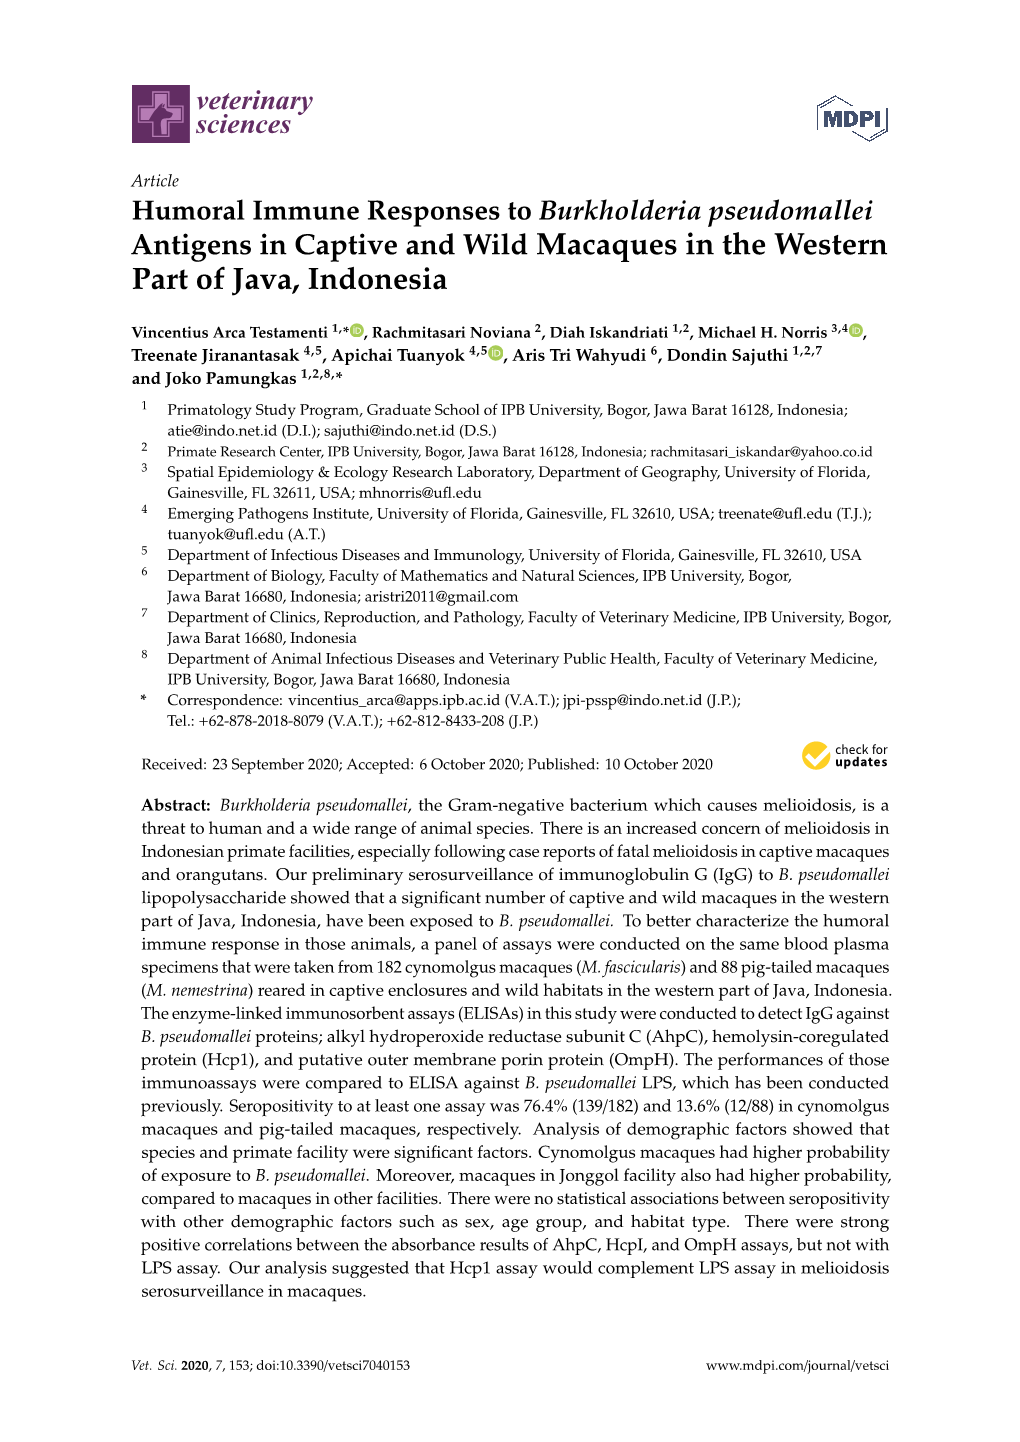 Humoral Immune Responses to Burkholderia Pseudomallei Antigens in Captive and Wild Macaques in the Western Part of Java, Indonesia